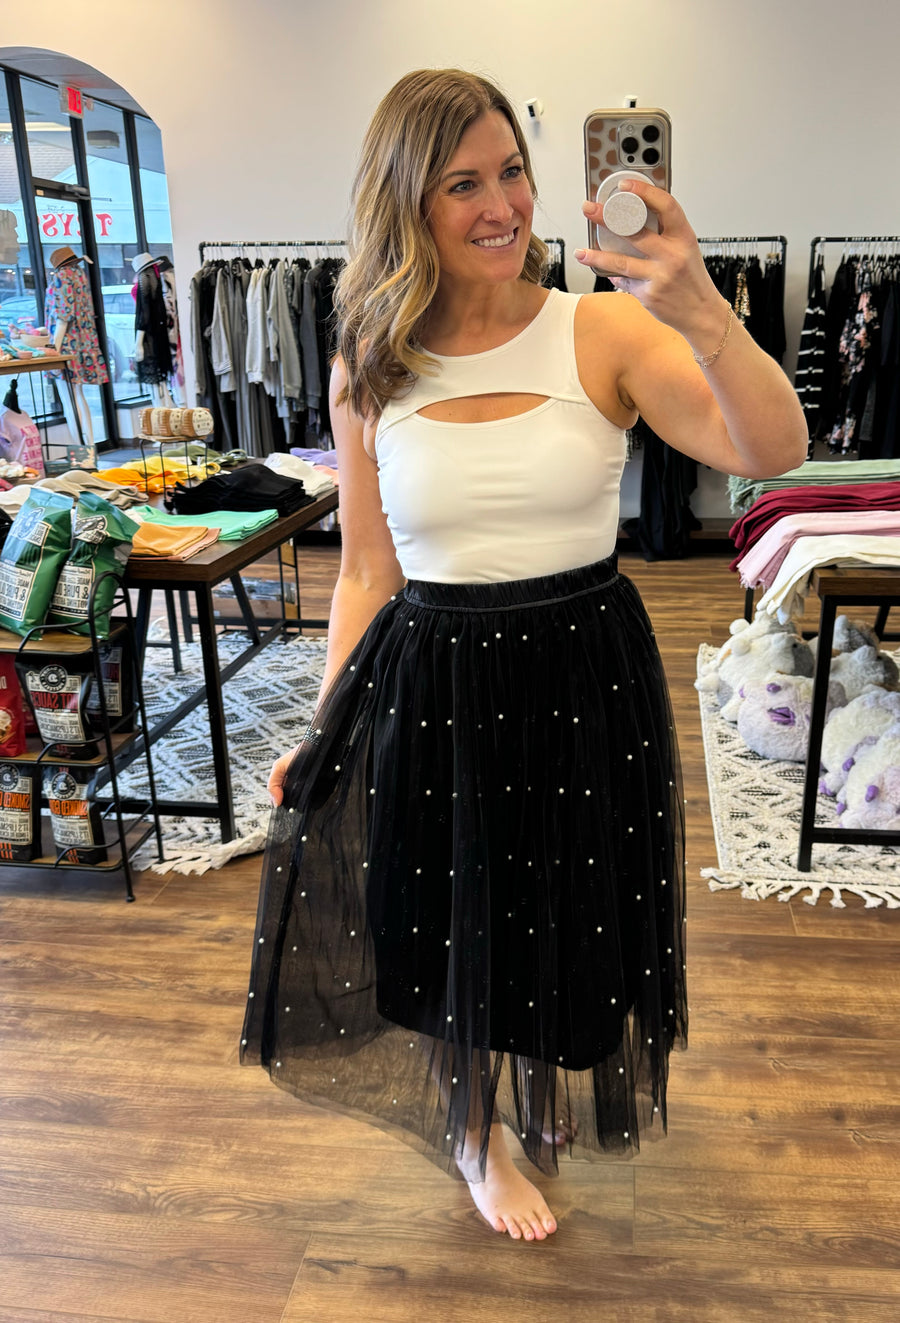 Breakfast at Tiffany’s - Tulle Skirt with Pearl Embellishments